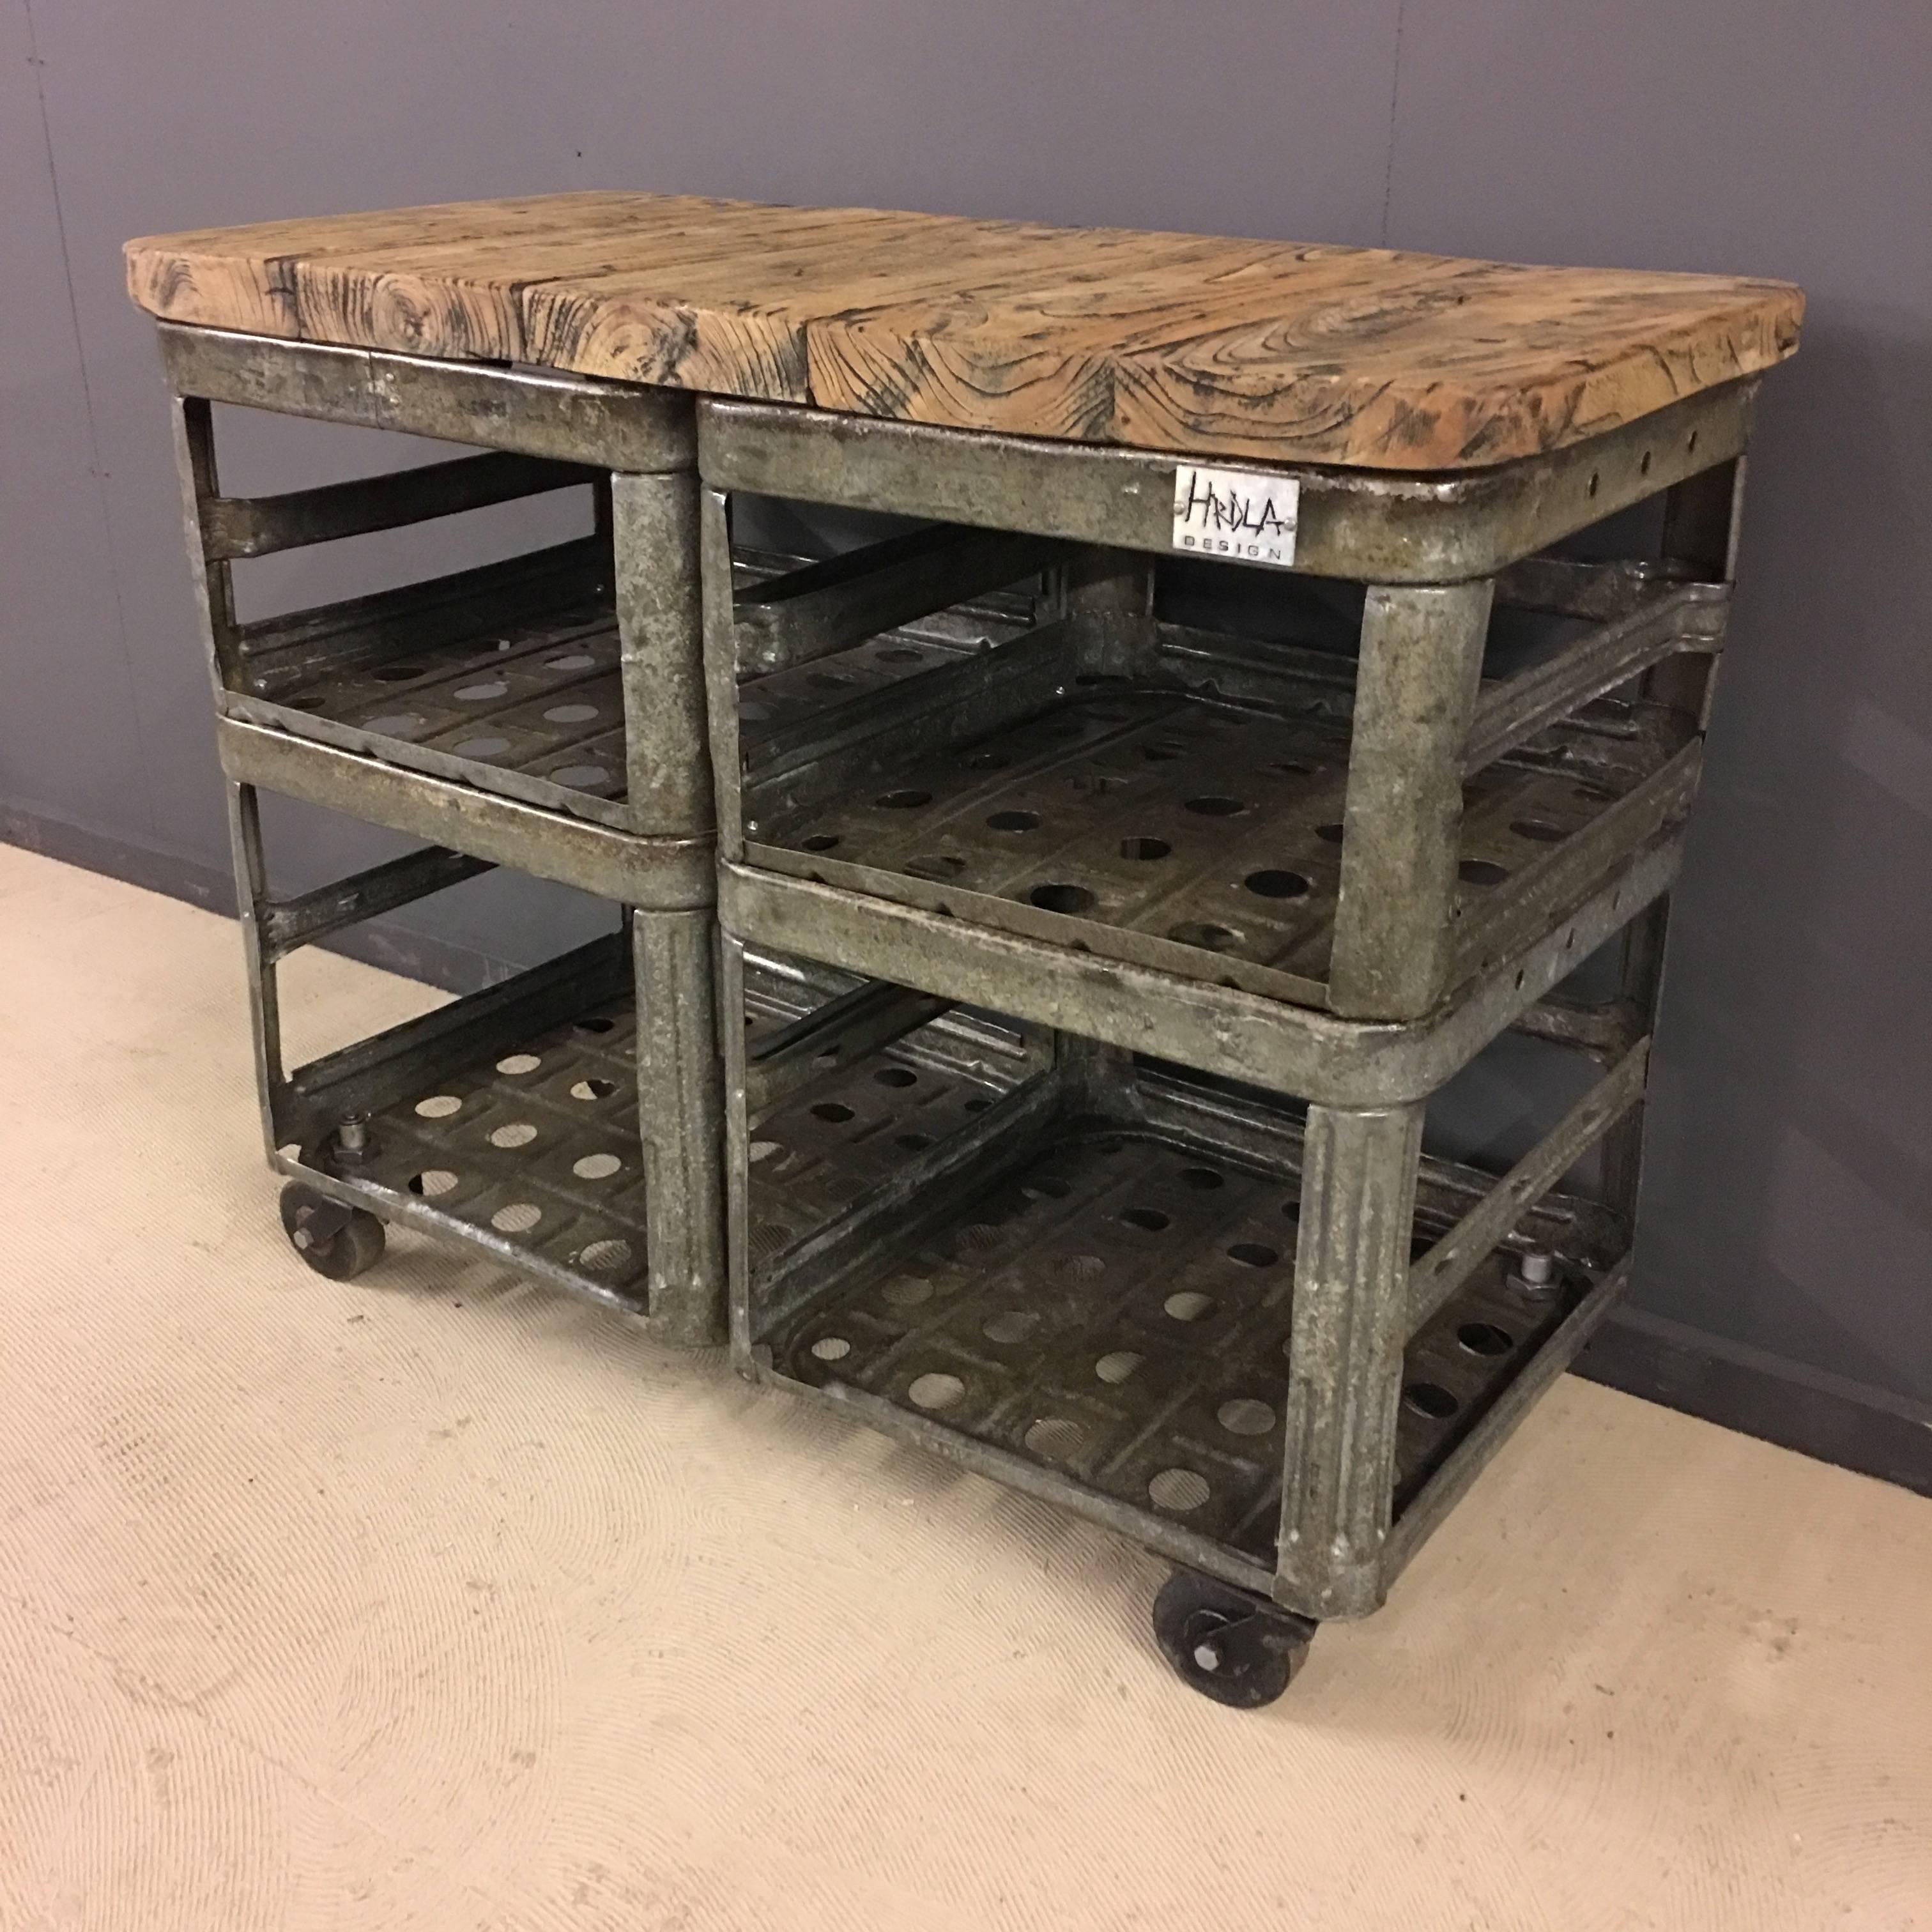 Cool Industrial rack by Hrdla Design.
Made in Czech Republic of vintage galvanized crates.
Gorgeous wooden top and four small Industrial wheels.